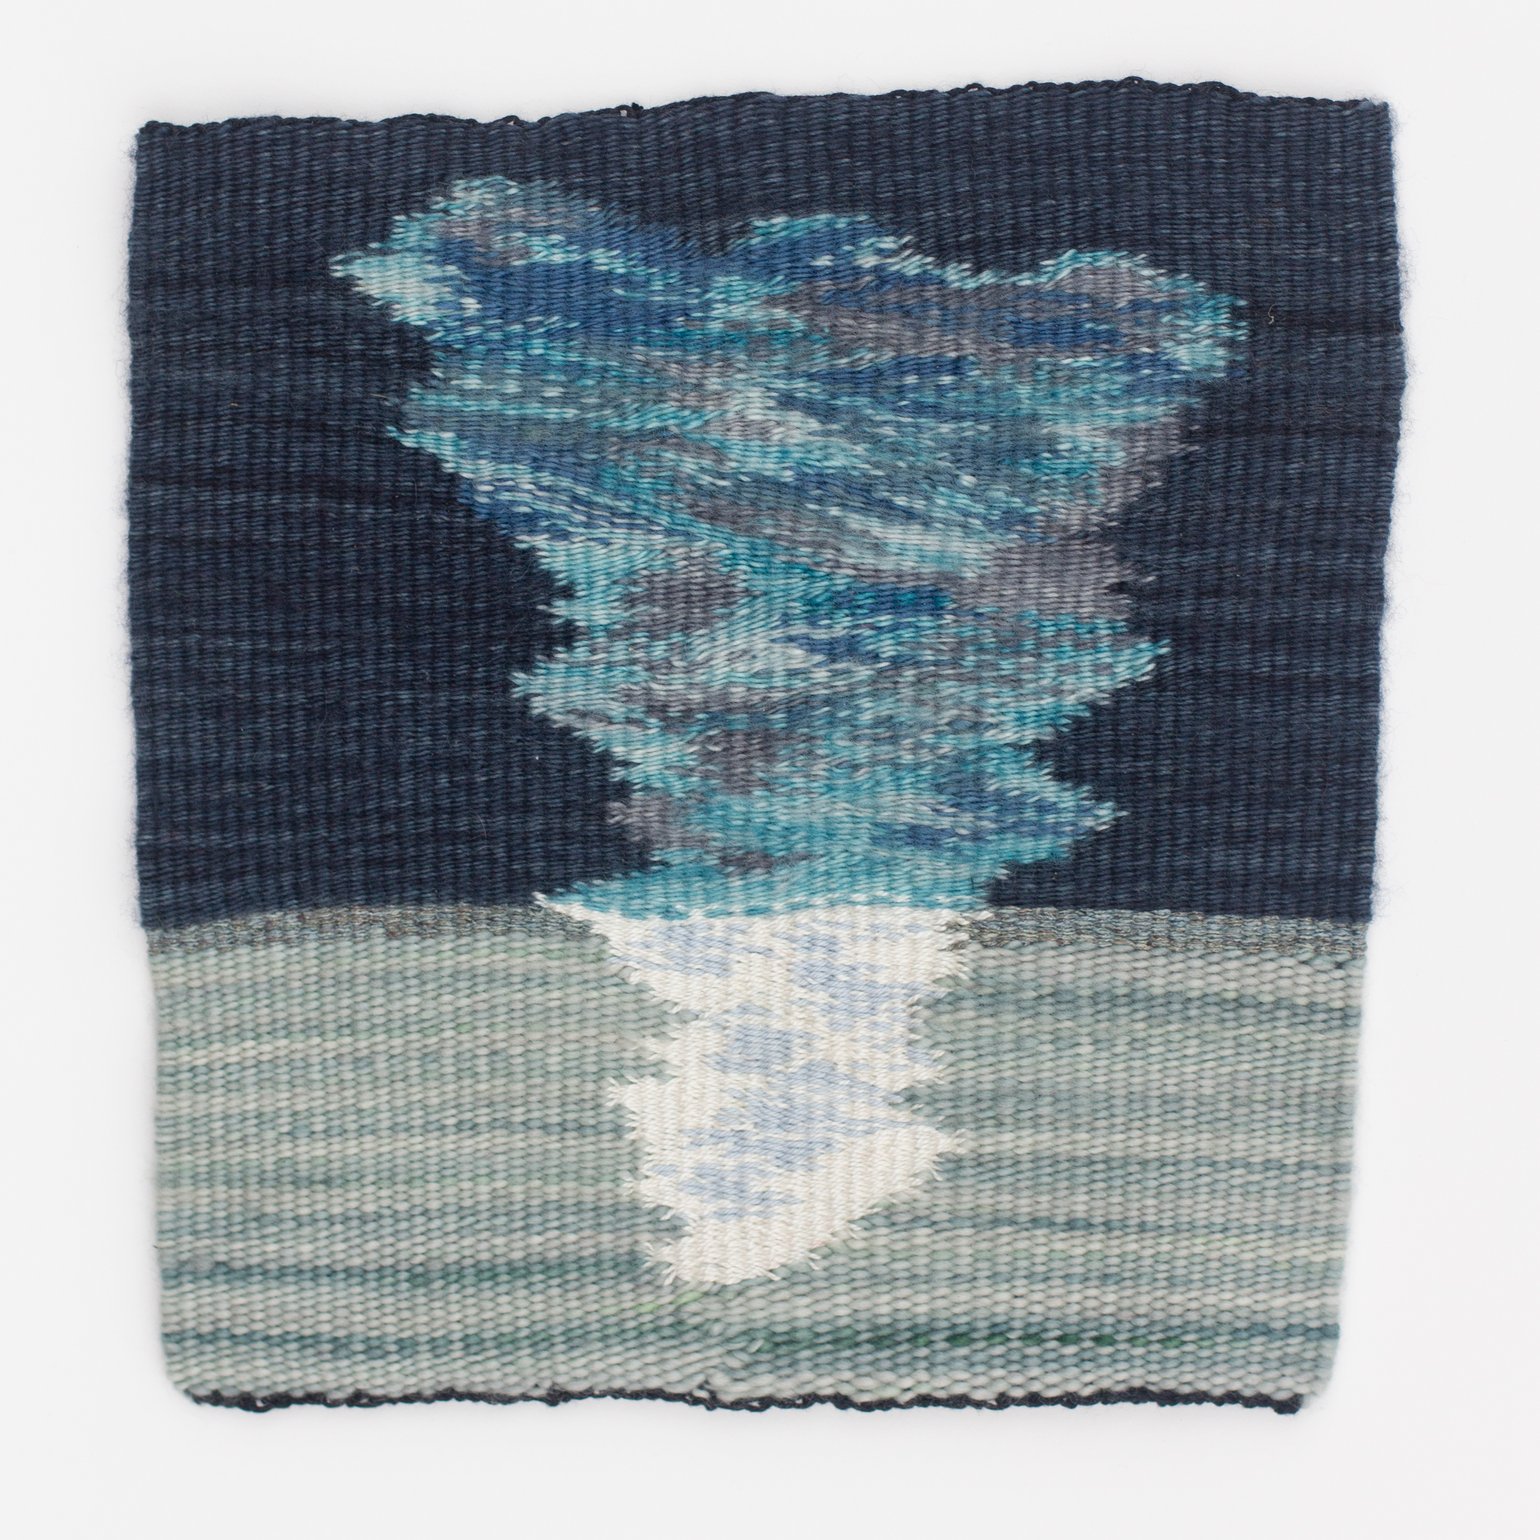 Image of Sky on the ice handwoven tapestry weaving